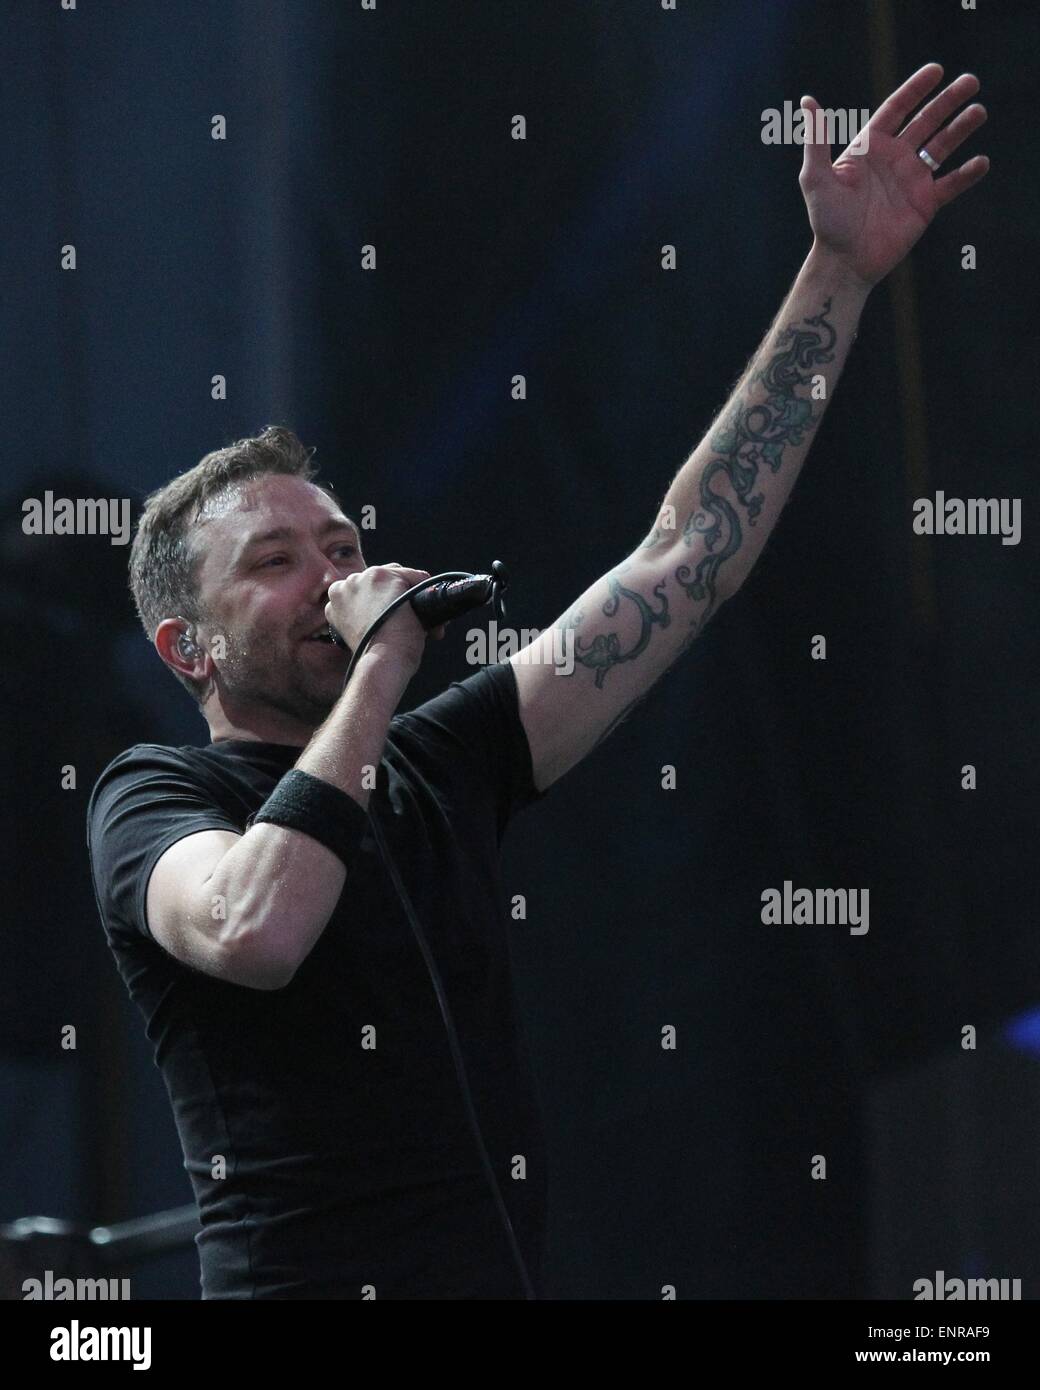 Las Vegas, NV, USA. 9th May, 2015. Tim McIlrath of Rise Against on stage for Rock in Rio USA 2015 - SAT, City of Rock, Las Vegas, NV May 9, 2015. Credit:  James Atoa/Everett Collection/Alamy Live News Stock Photo